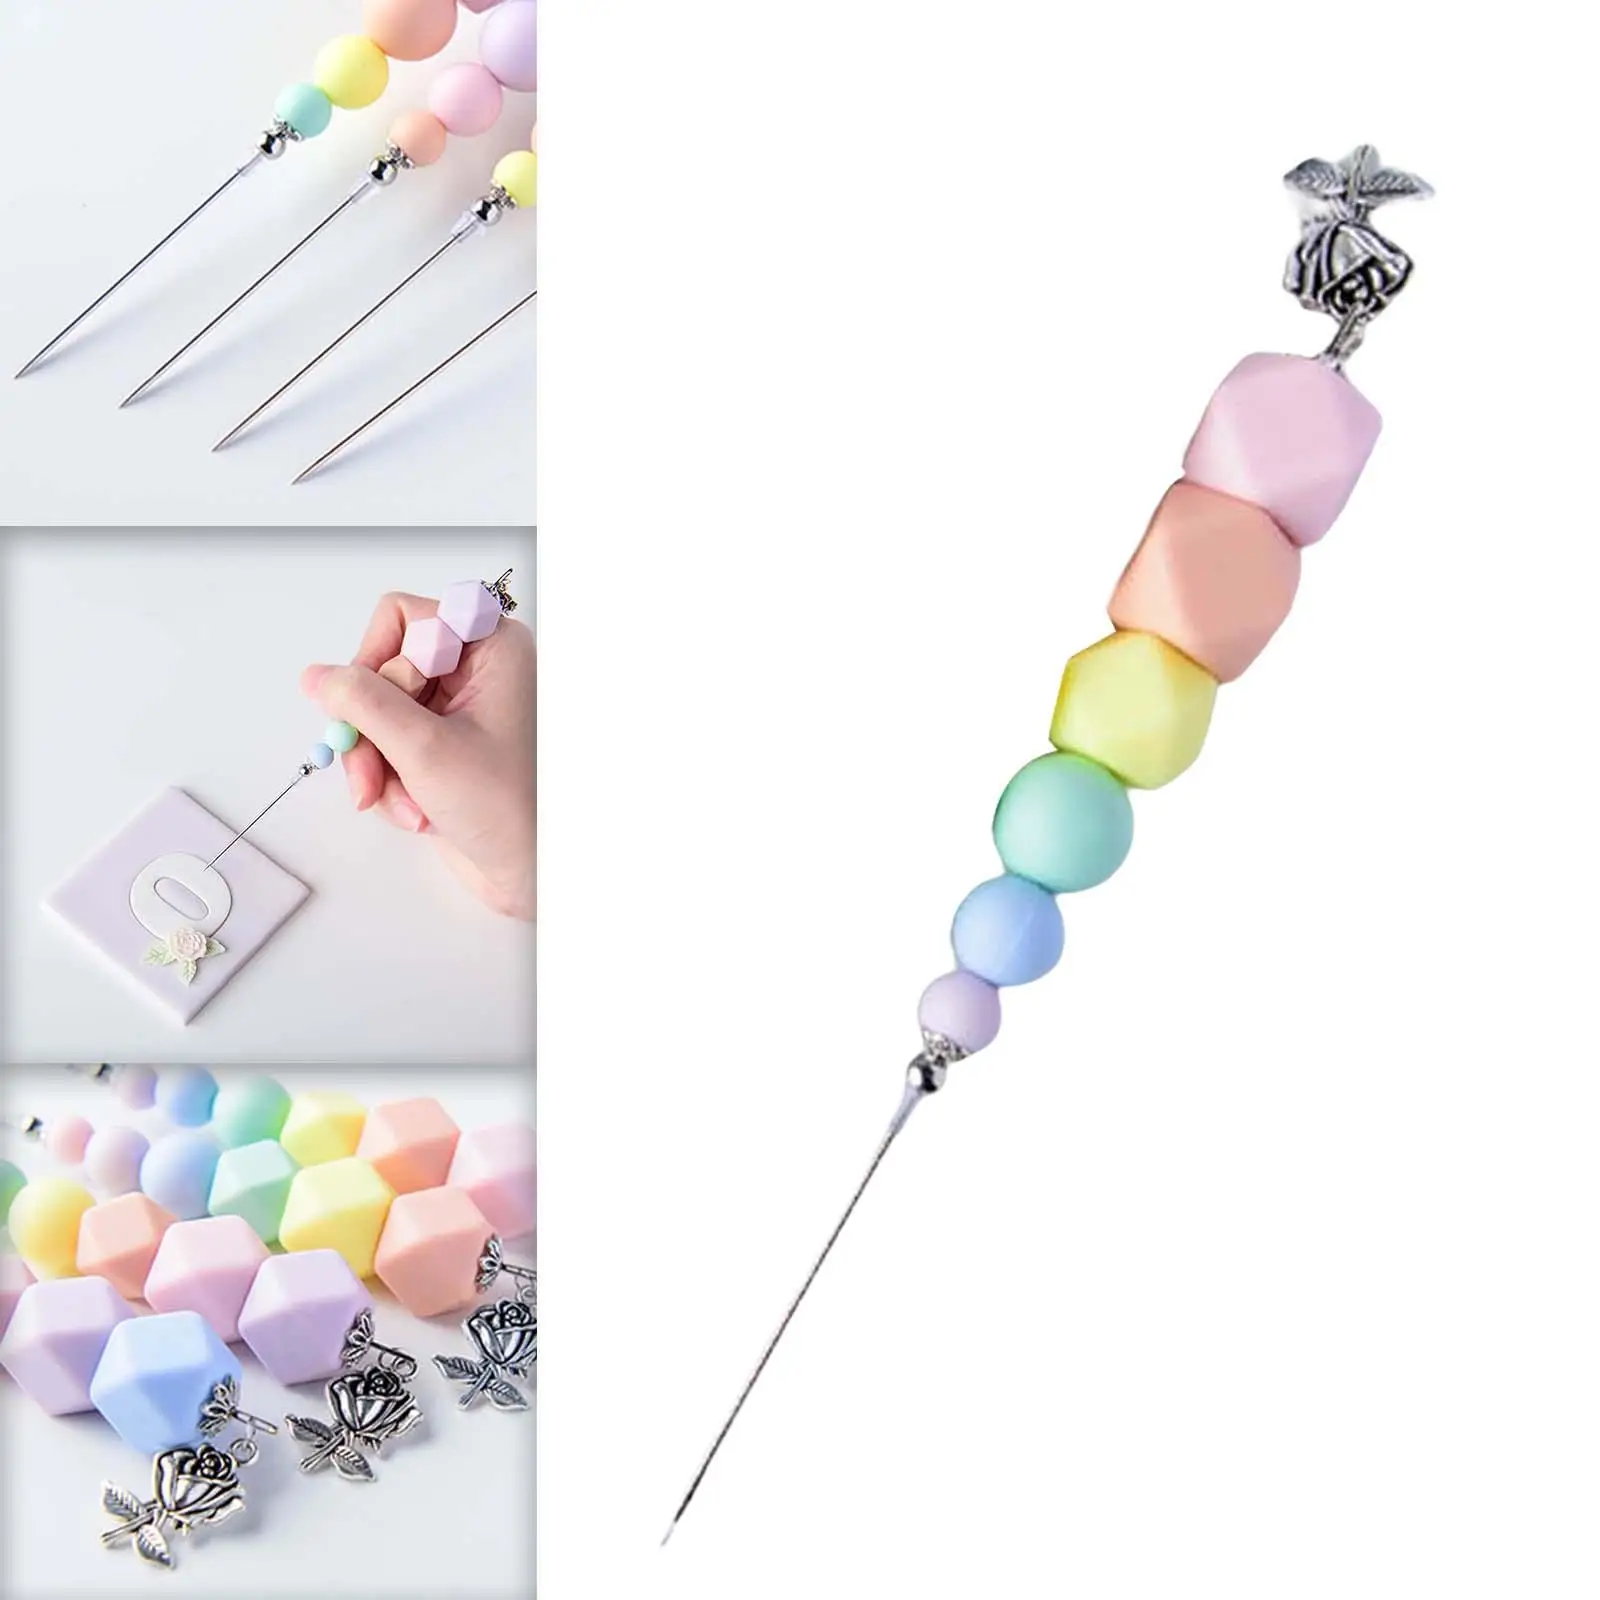 1x Icing Biscuit Pin Fittings Decorating Professional Colorful Royal Modeling Tool Sugarcraft Mixing Pin for Household Baking